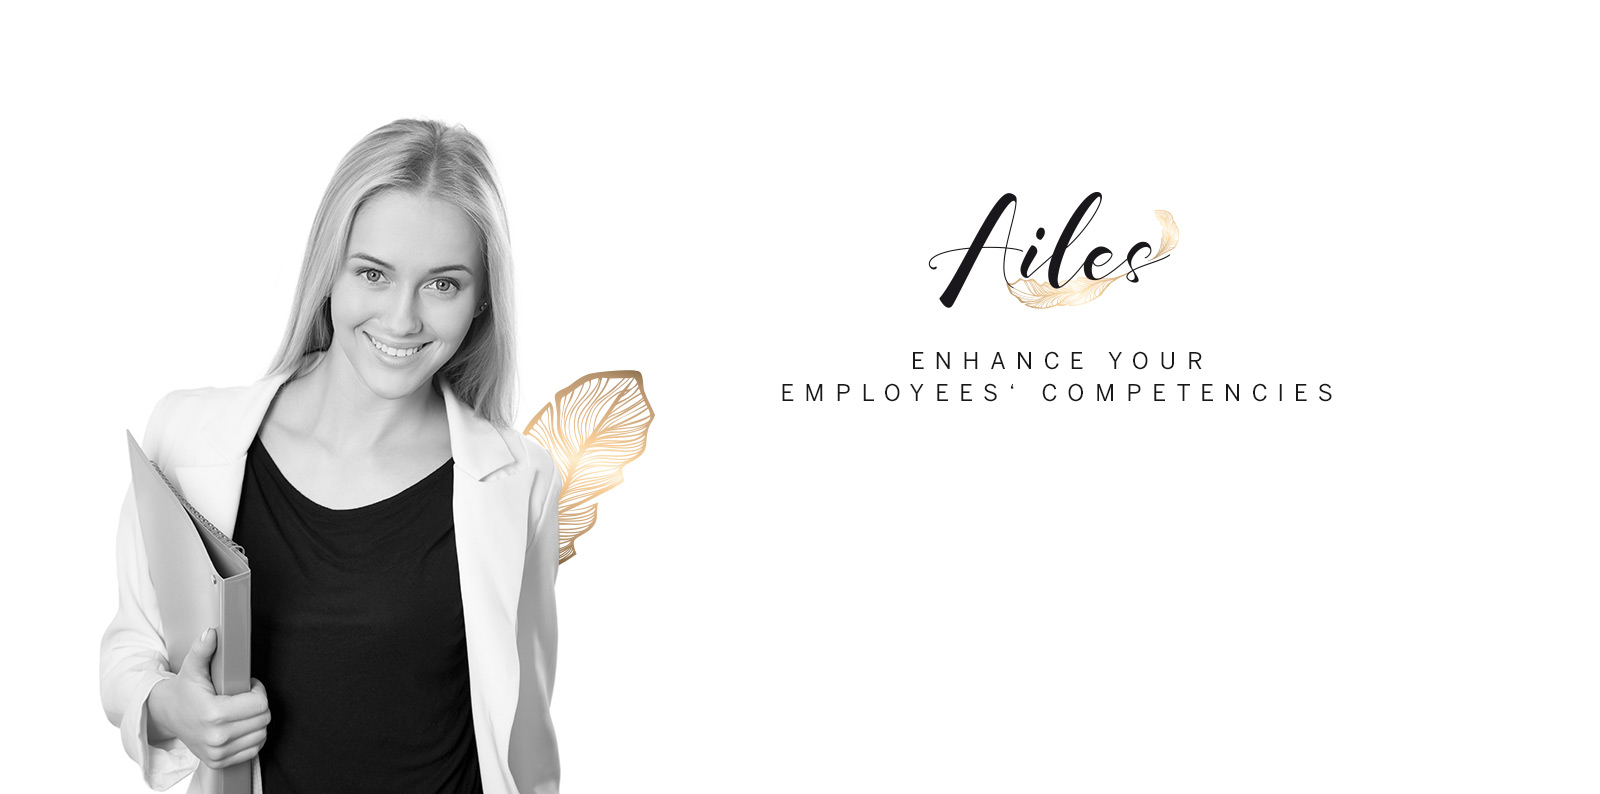 Enhance your employees' competencies